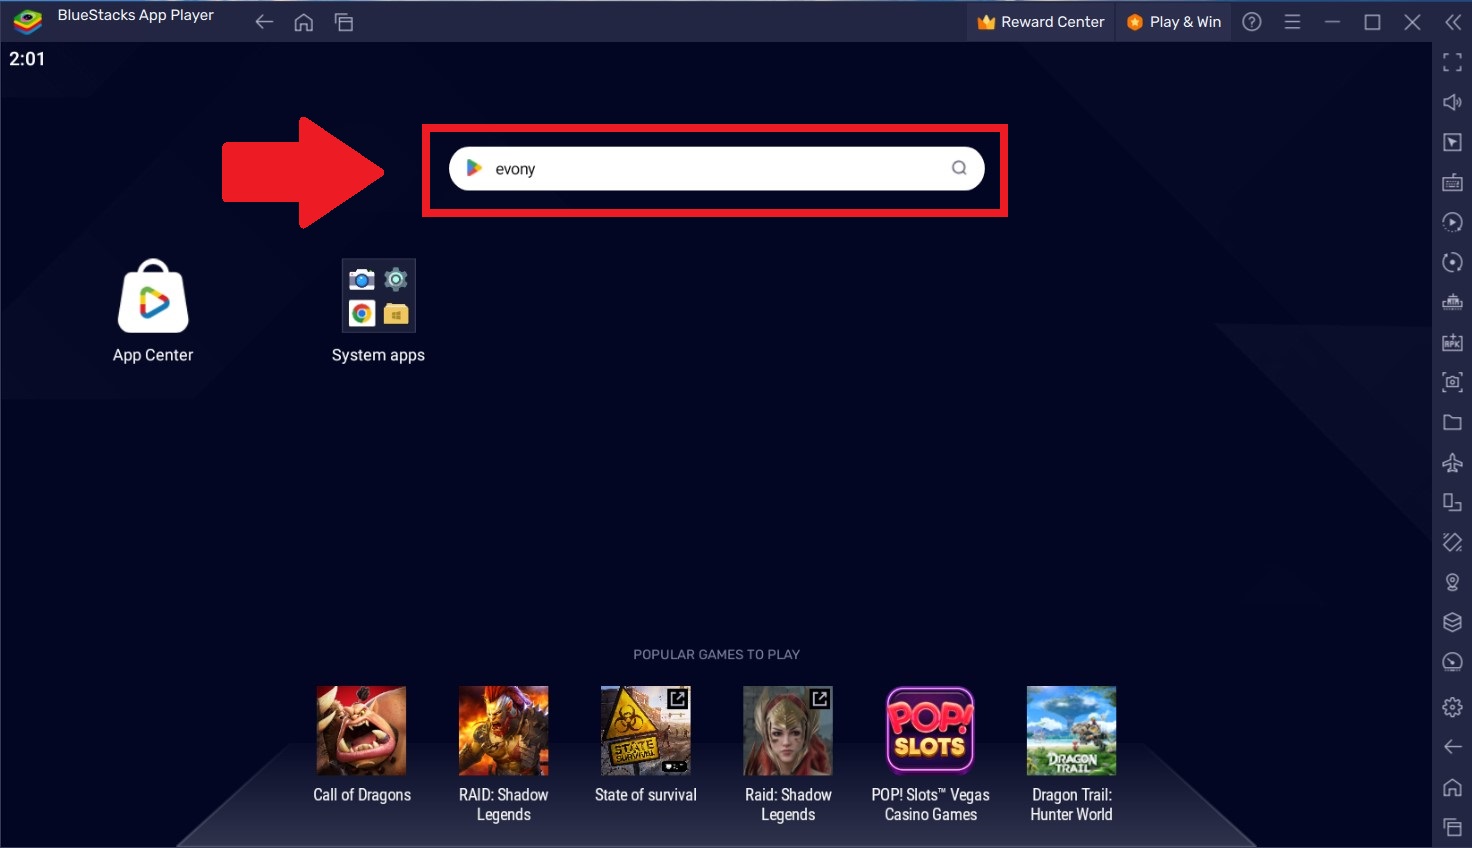 How to Install and Play Honor of Kings on PC with BlueStacks